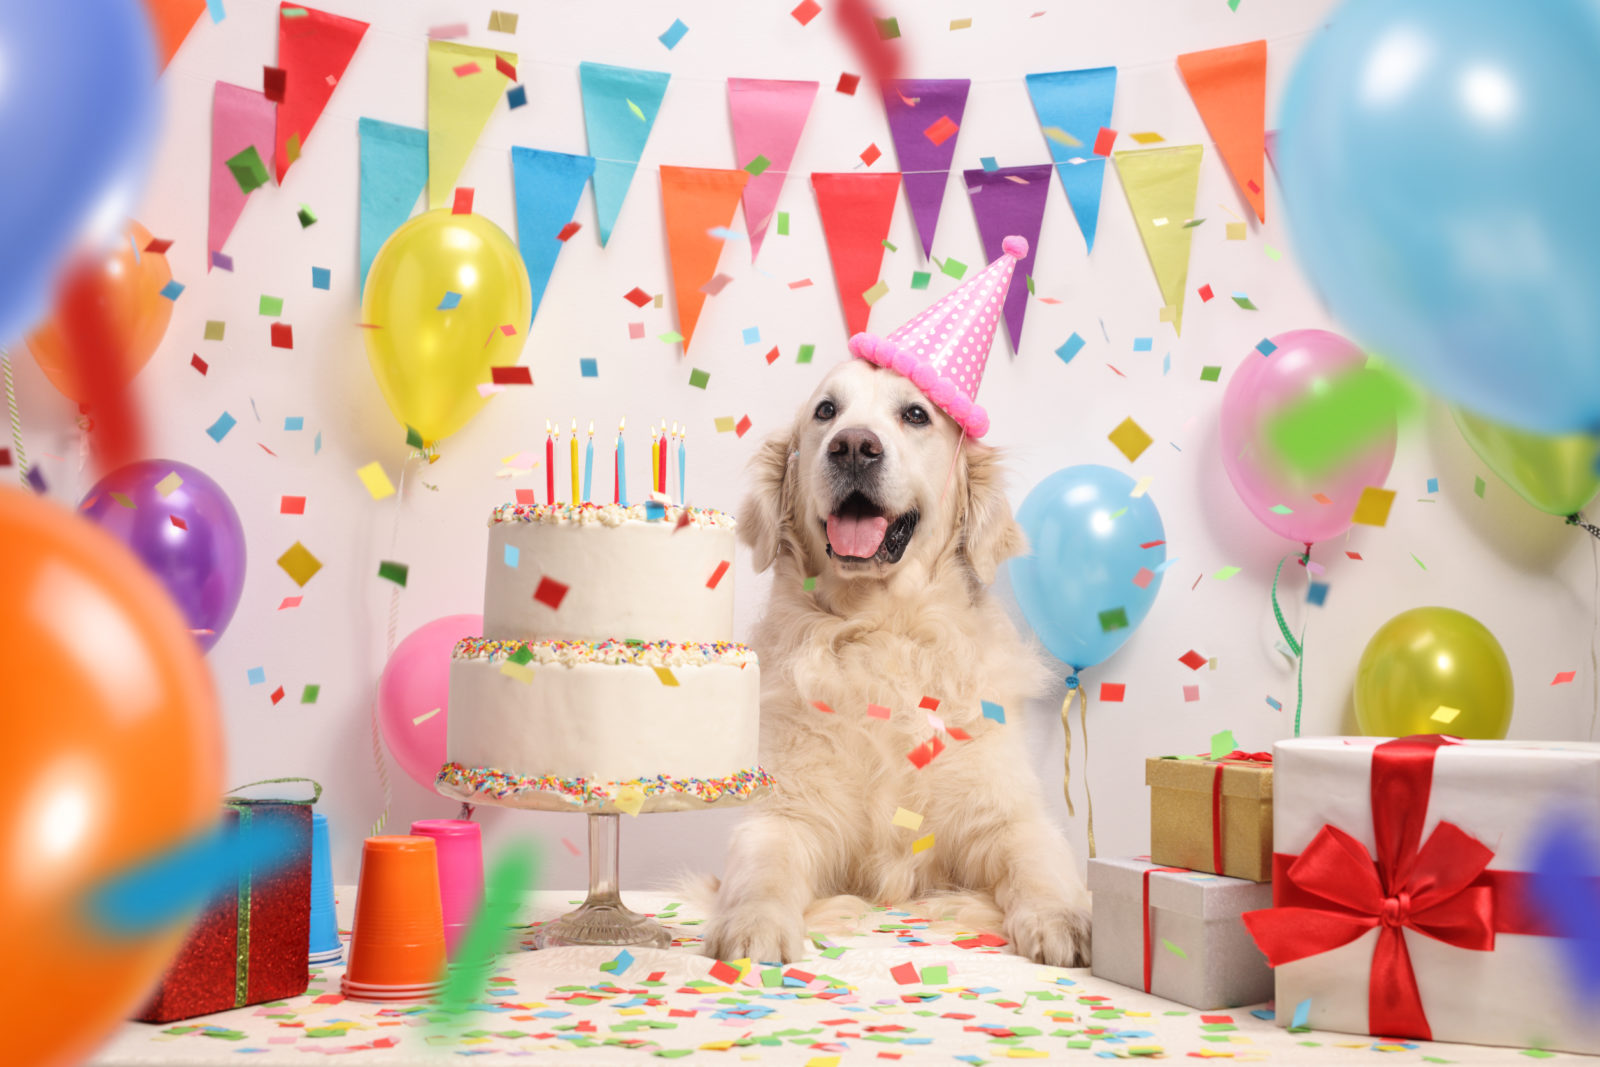 West Palm Beach dog birthday parties with VIP very important paws